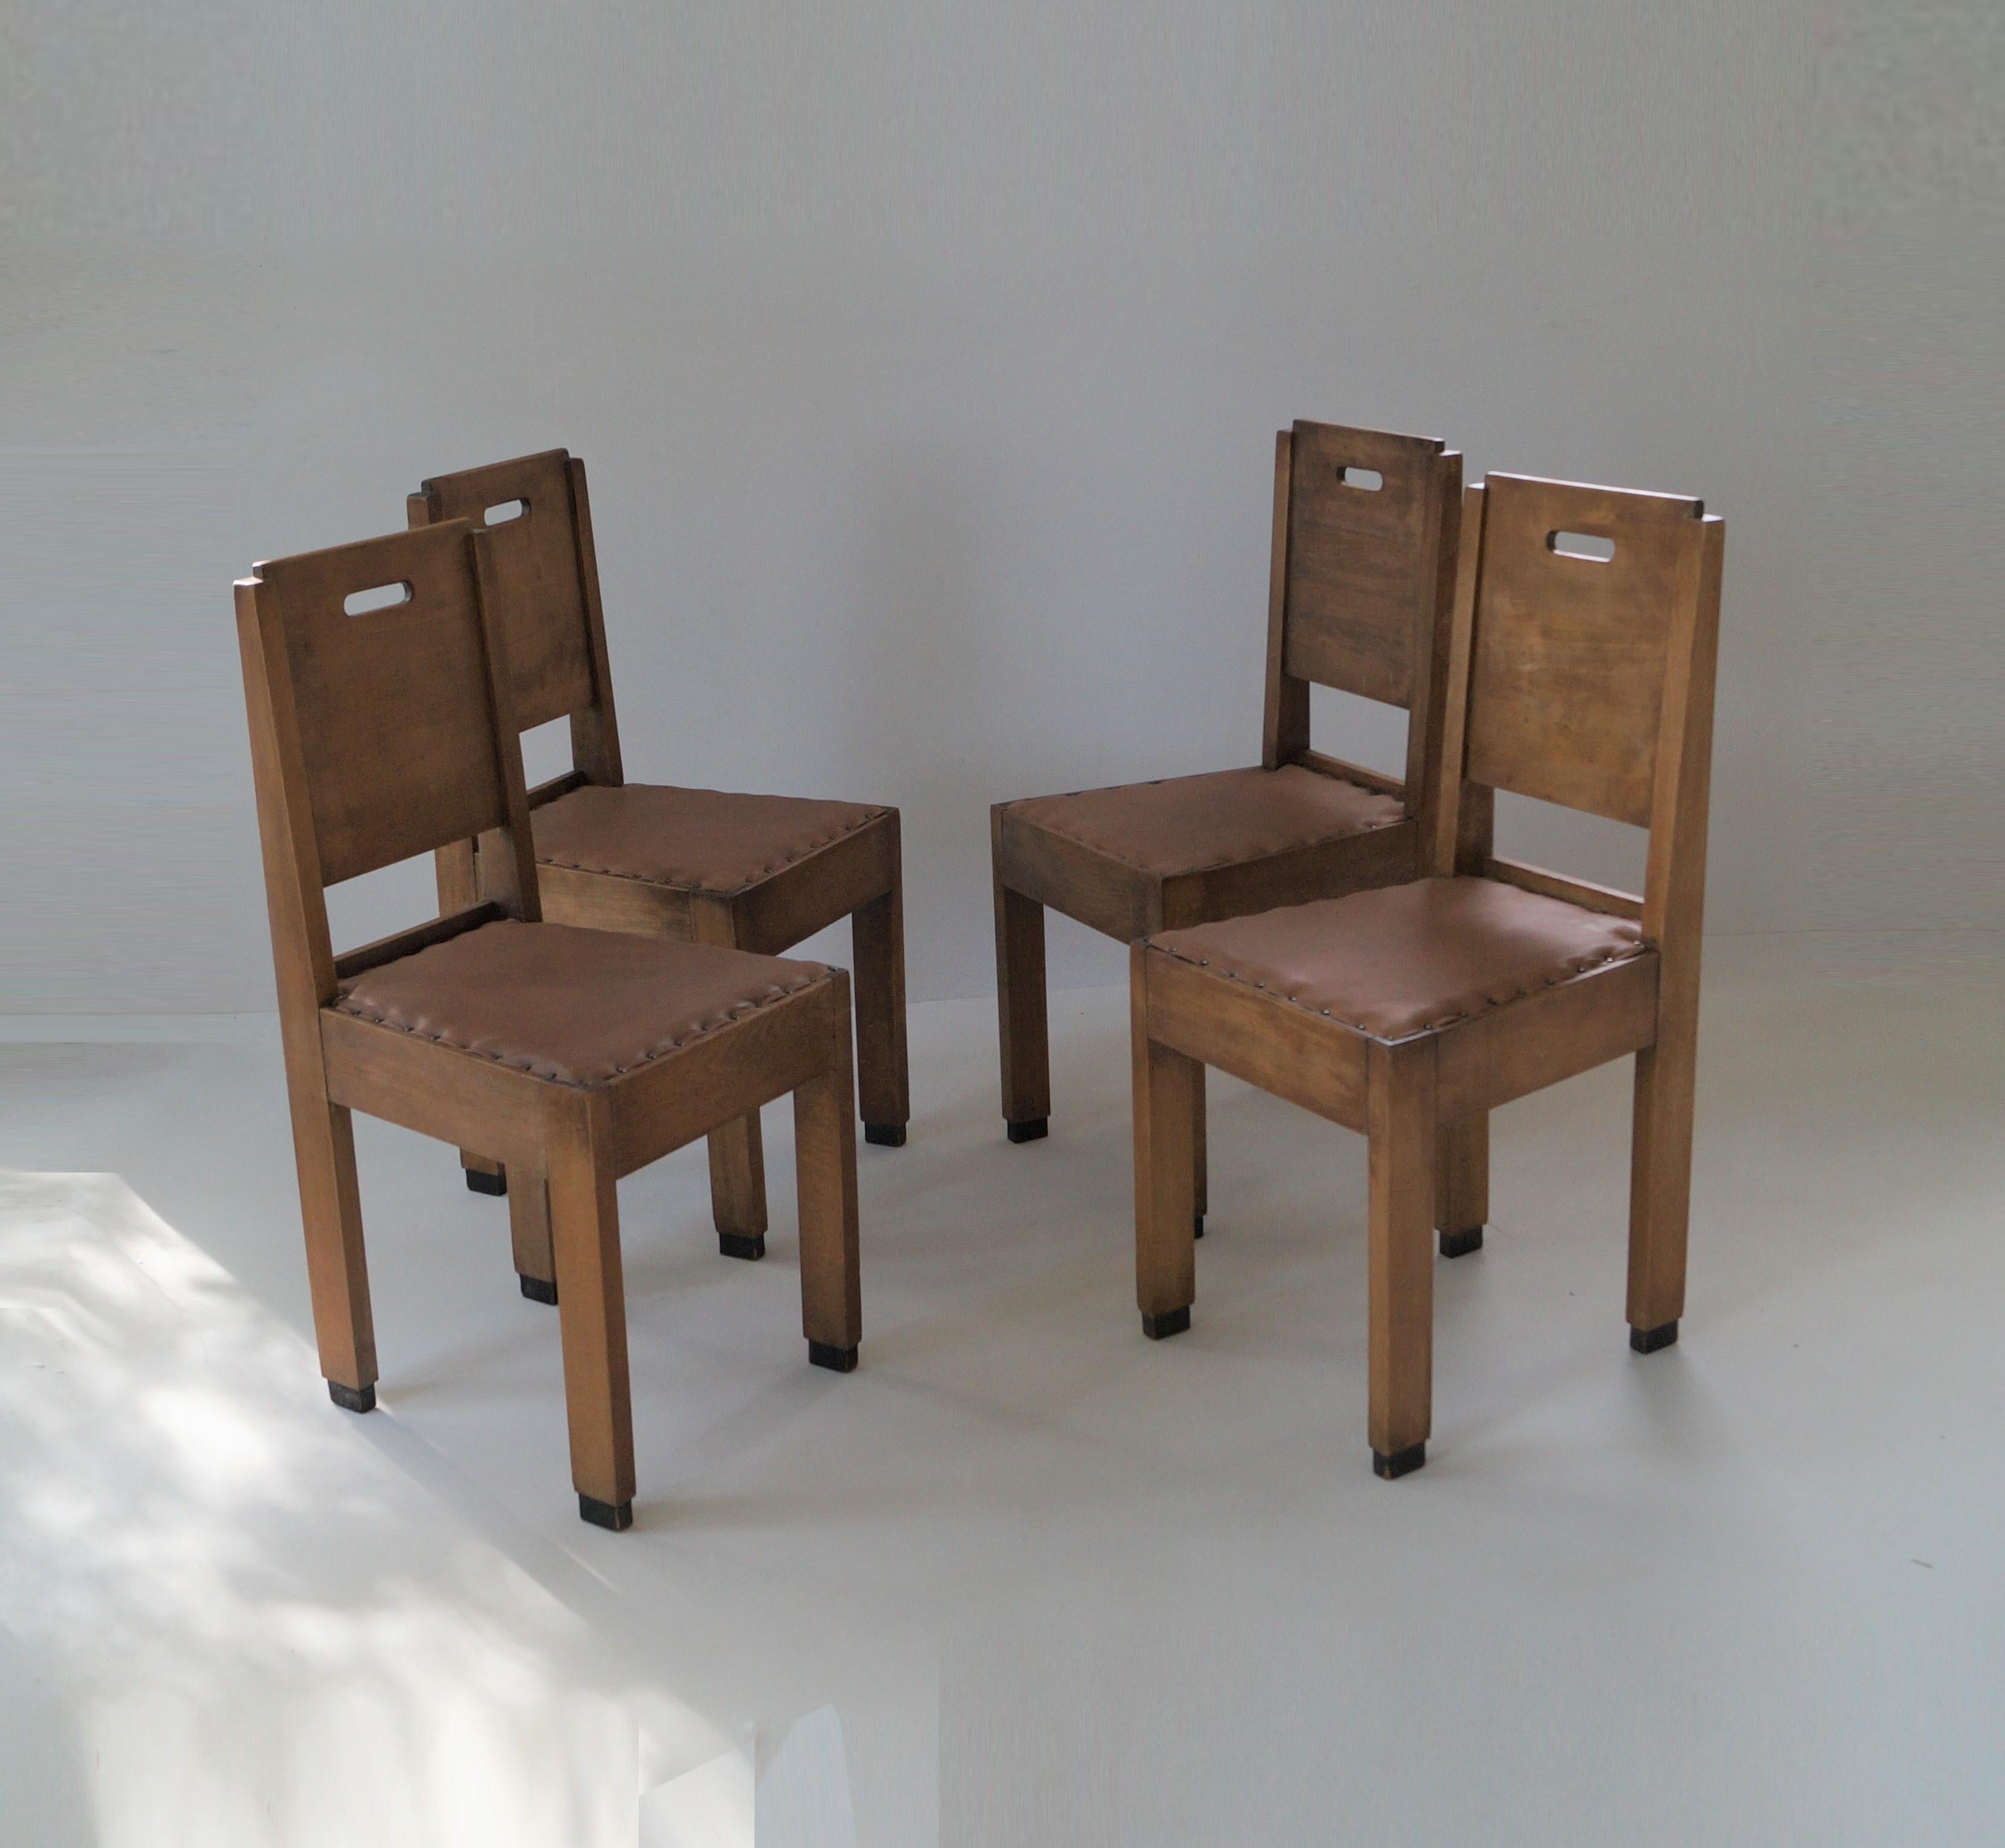 Unique set of four early (around 1910-1920) Haagse School dining chairs with De Stijl influences. Very austere and functional design with clean lines and oval shaped recesses that operate as handles. Great in an out of the box or minimalist interior